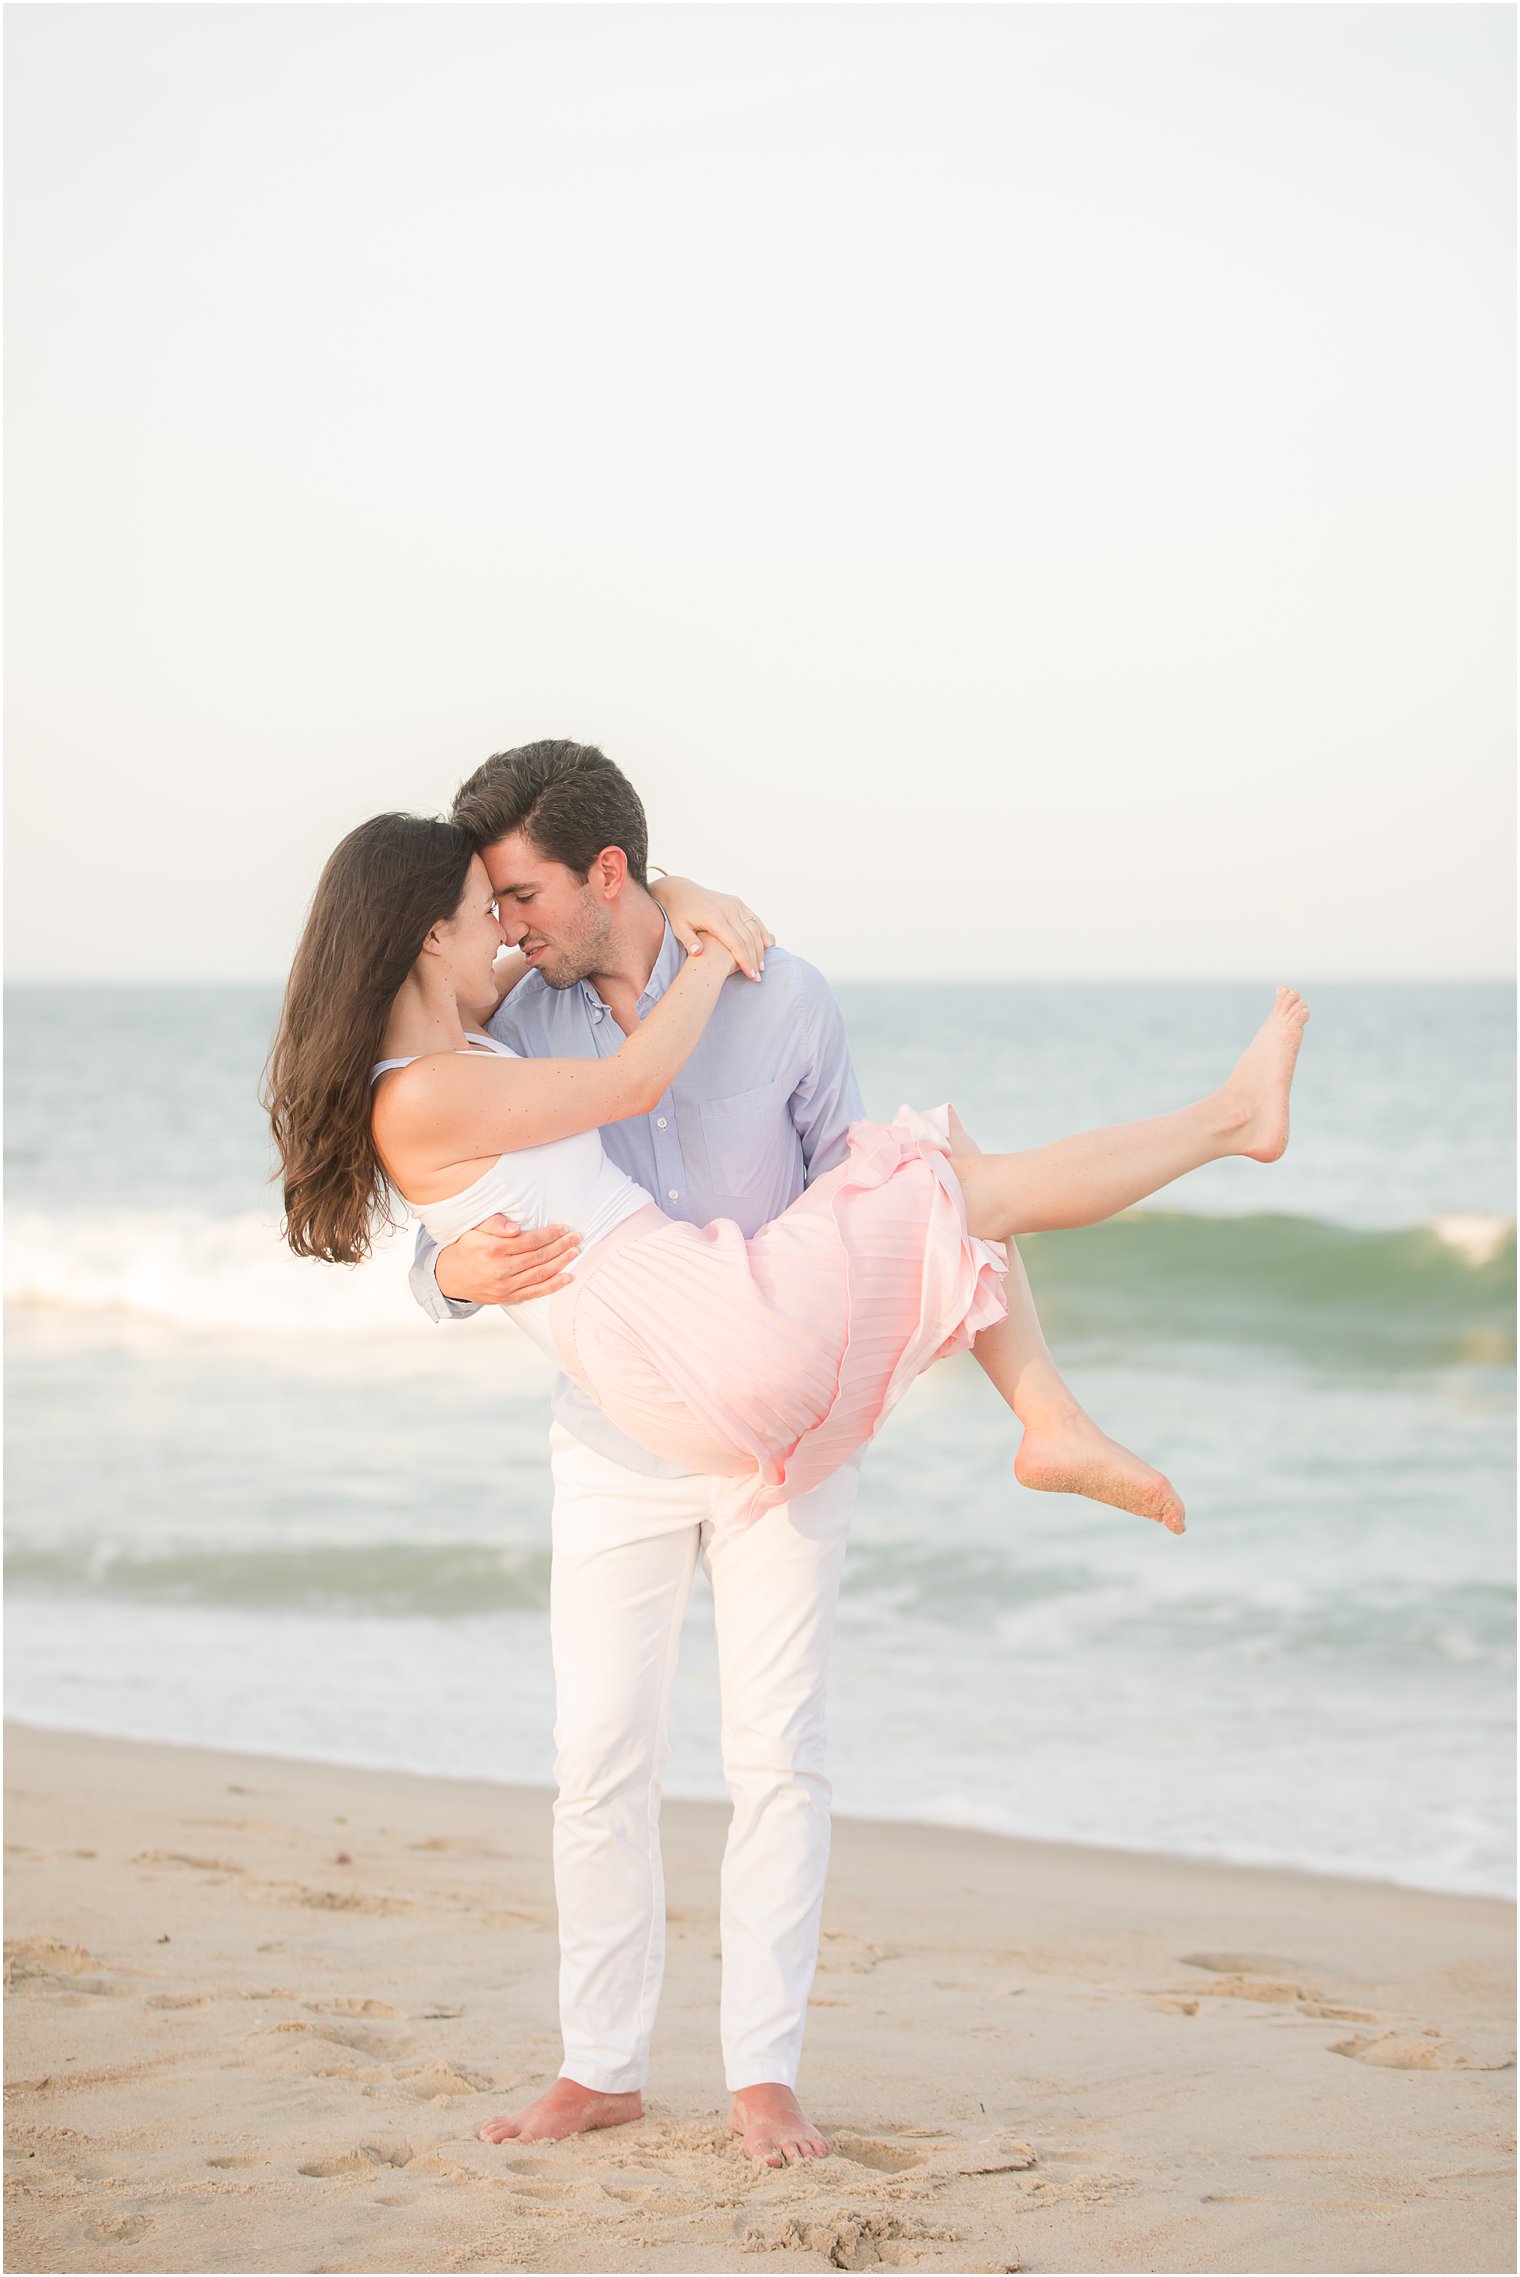 groom lifts bride in pink skirt during beach engagement session